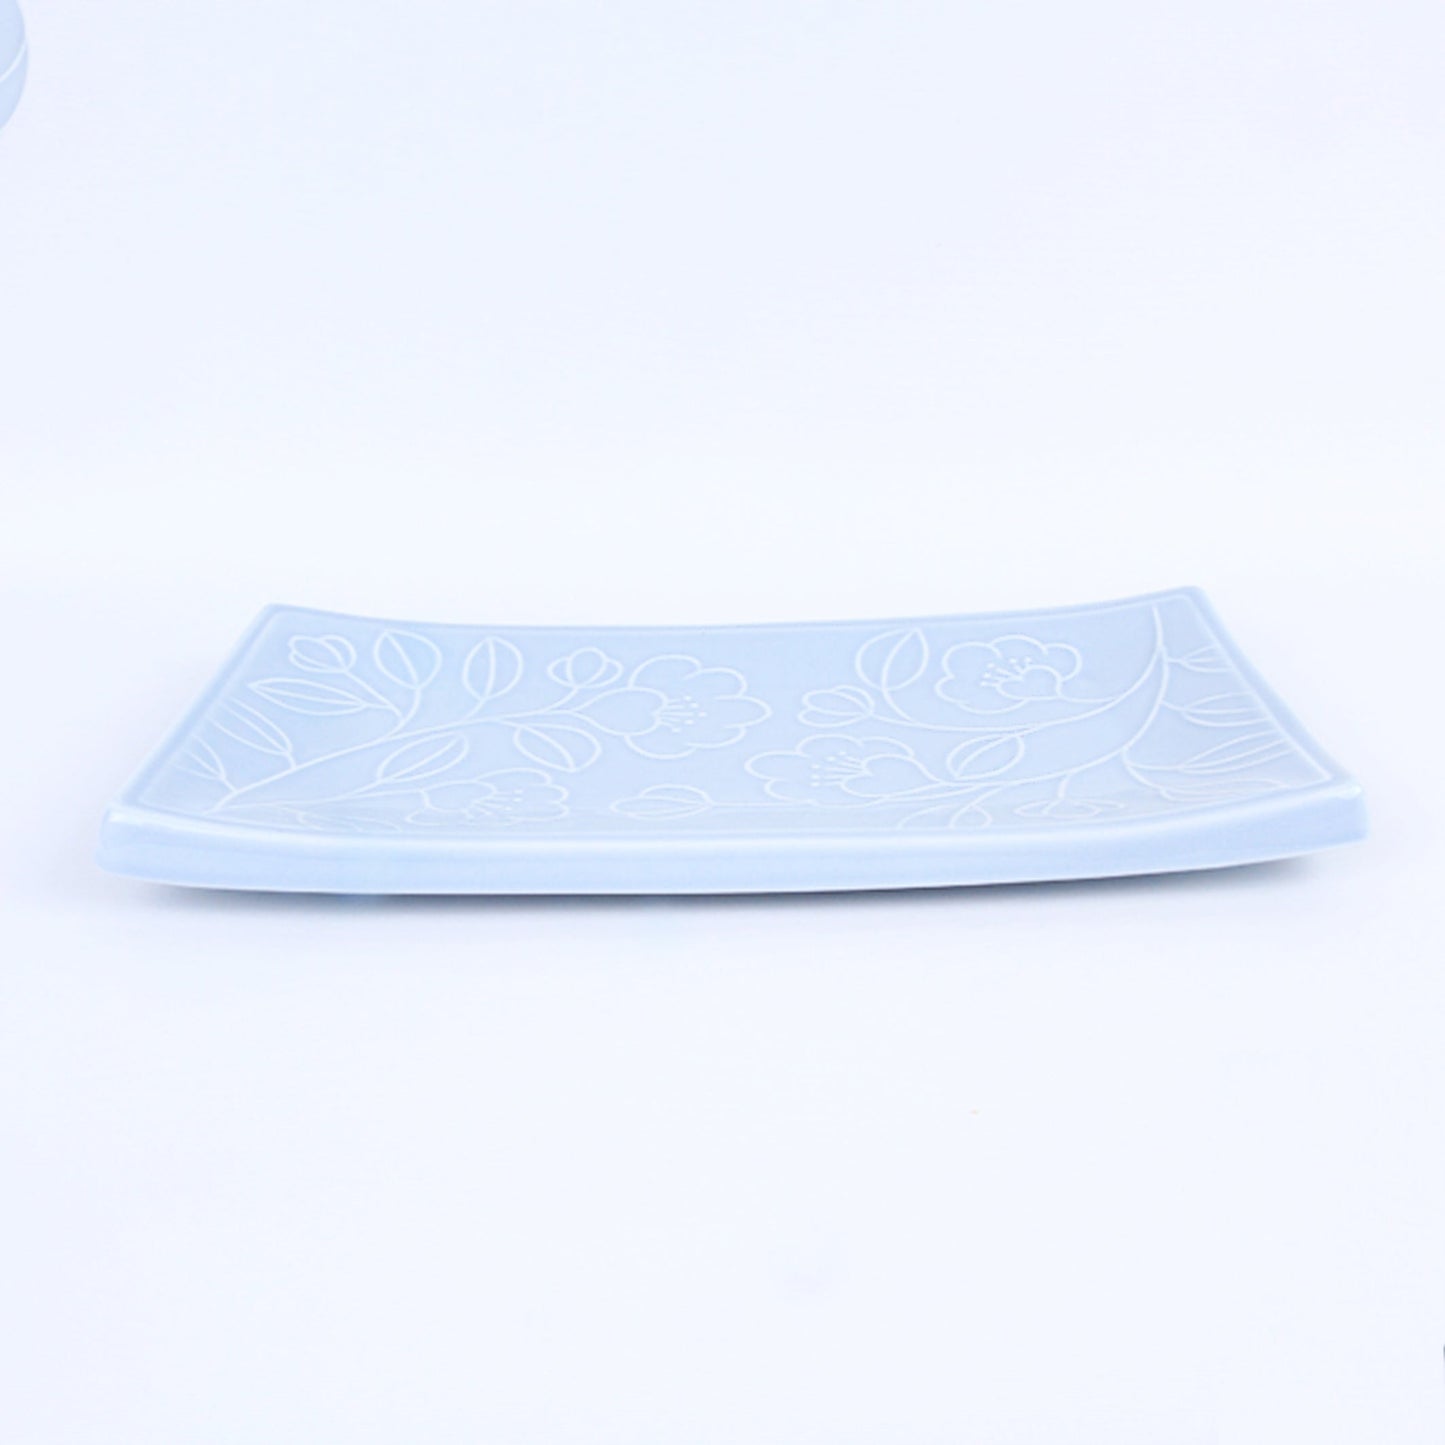 Refreshing Rectangular Plate 300mm (Mint Color)𝟭 𝗣𝗹𝘂𝘀 𝟭